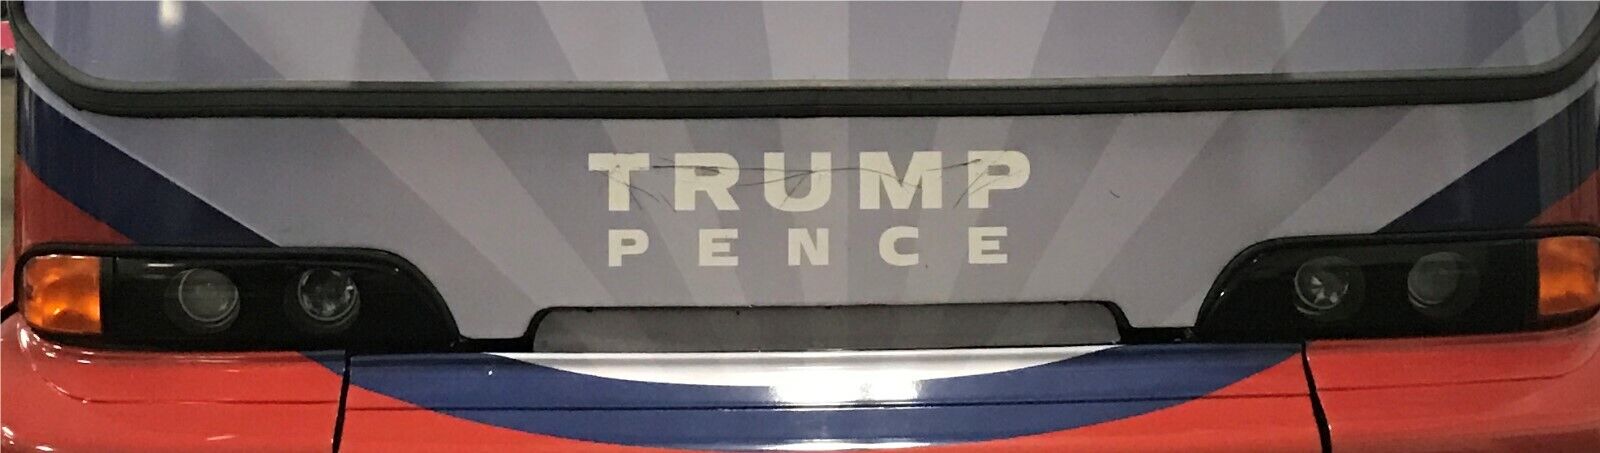 President Donald Trump Pence 2016 Actual Front Graphic Taken Off Of Tour Bus